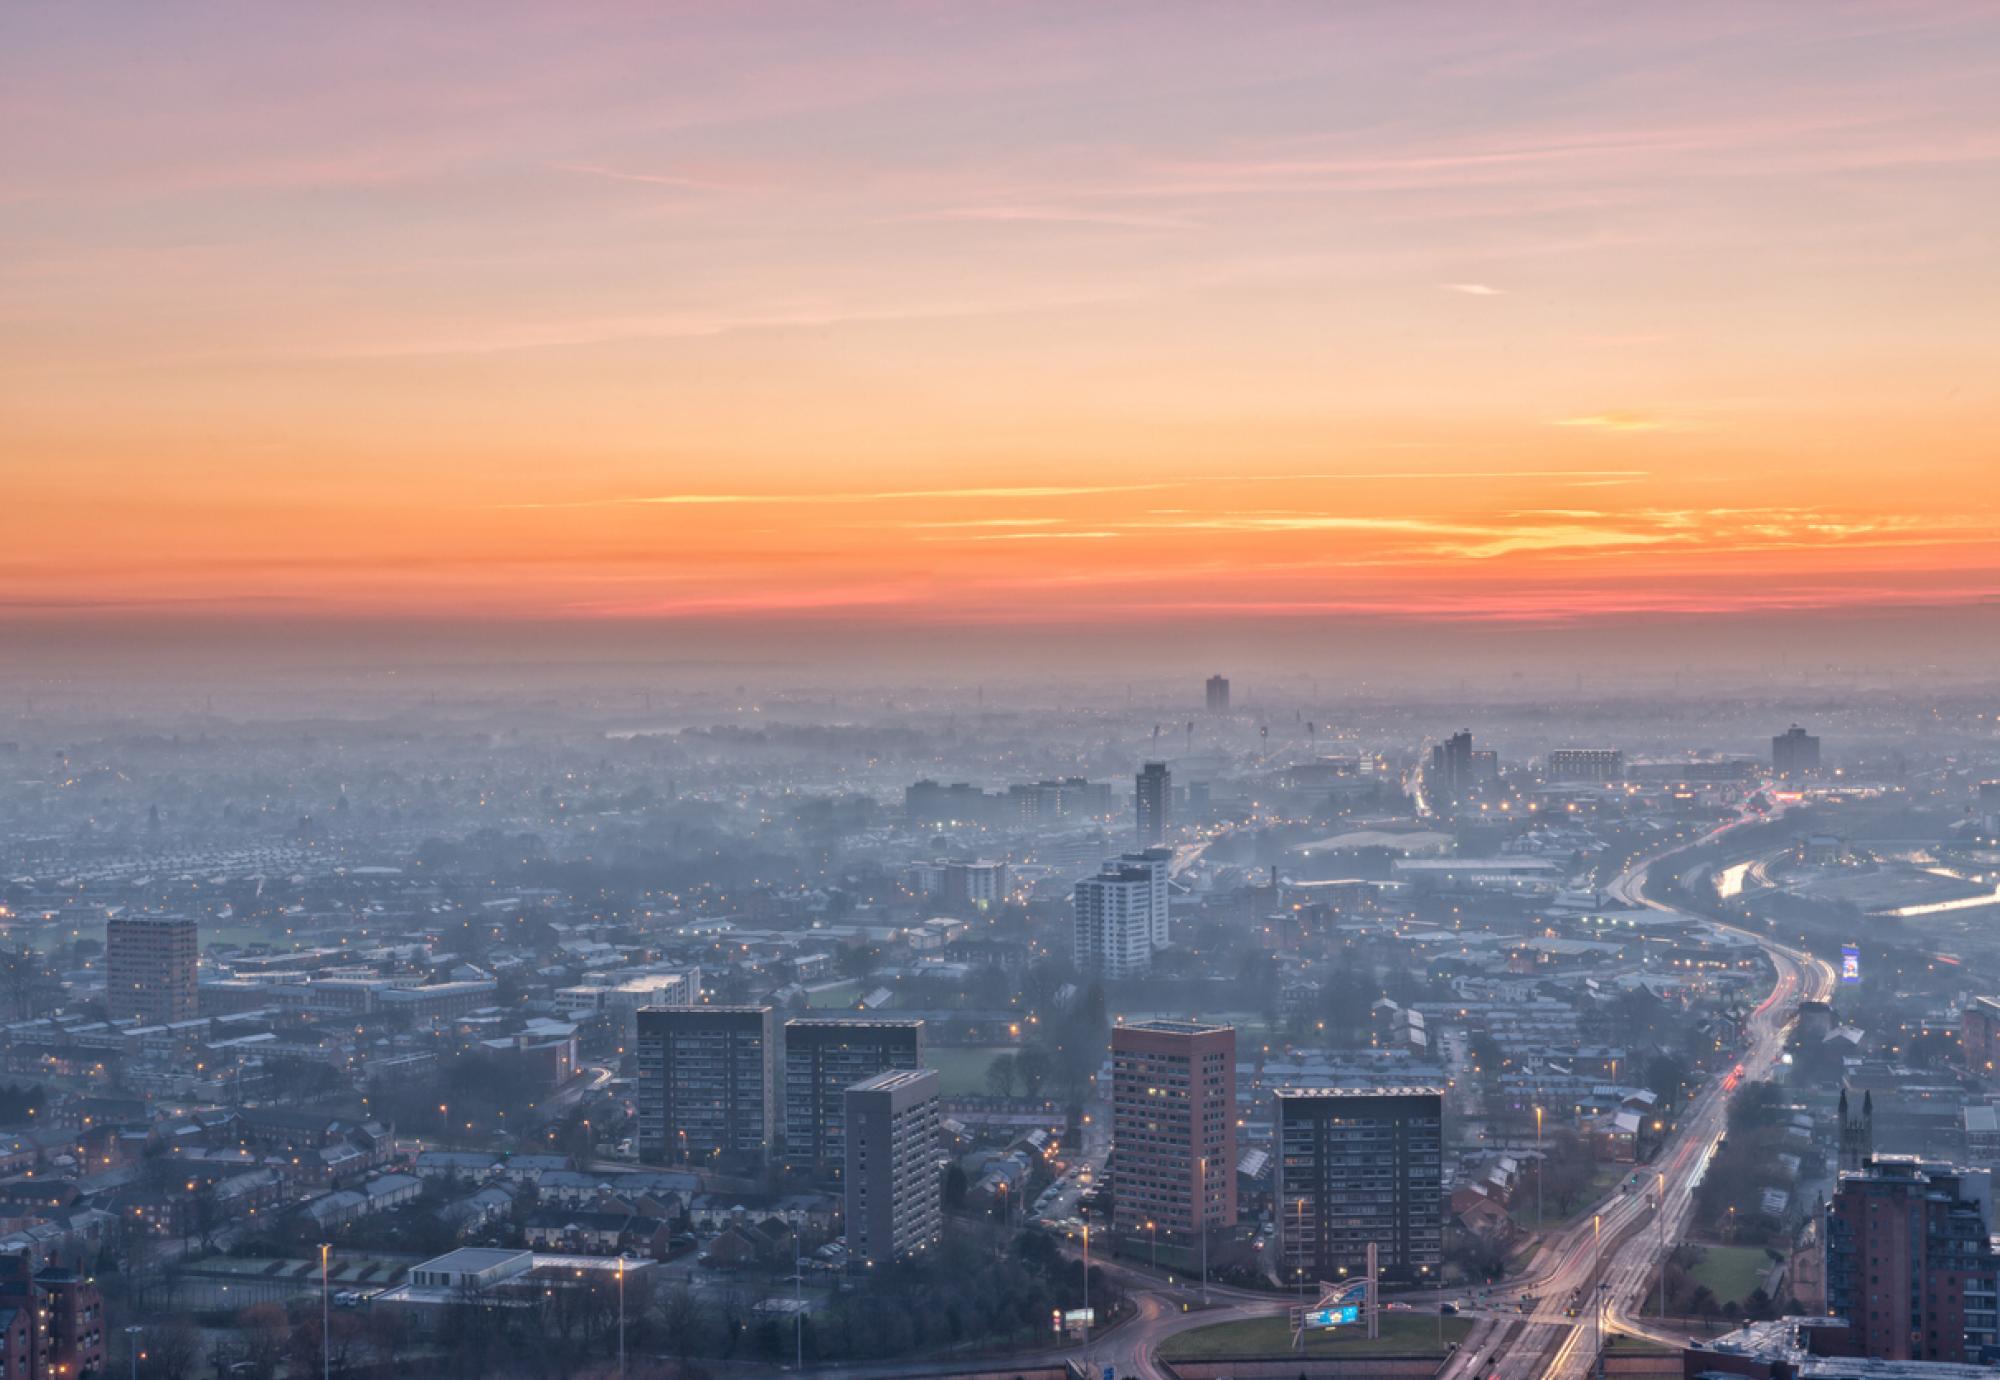 Dusk view of Manchester, looking over towards Salford